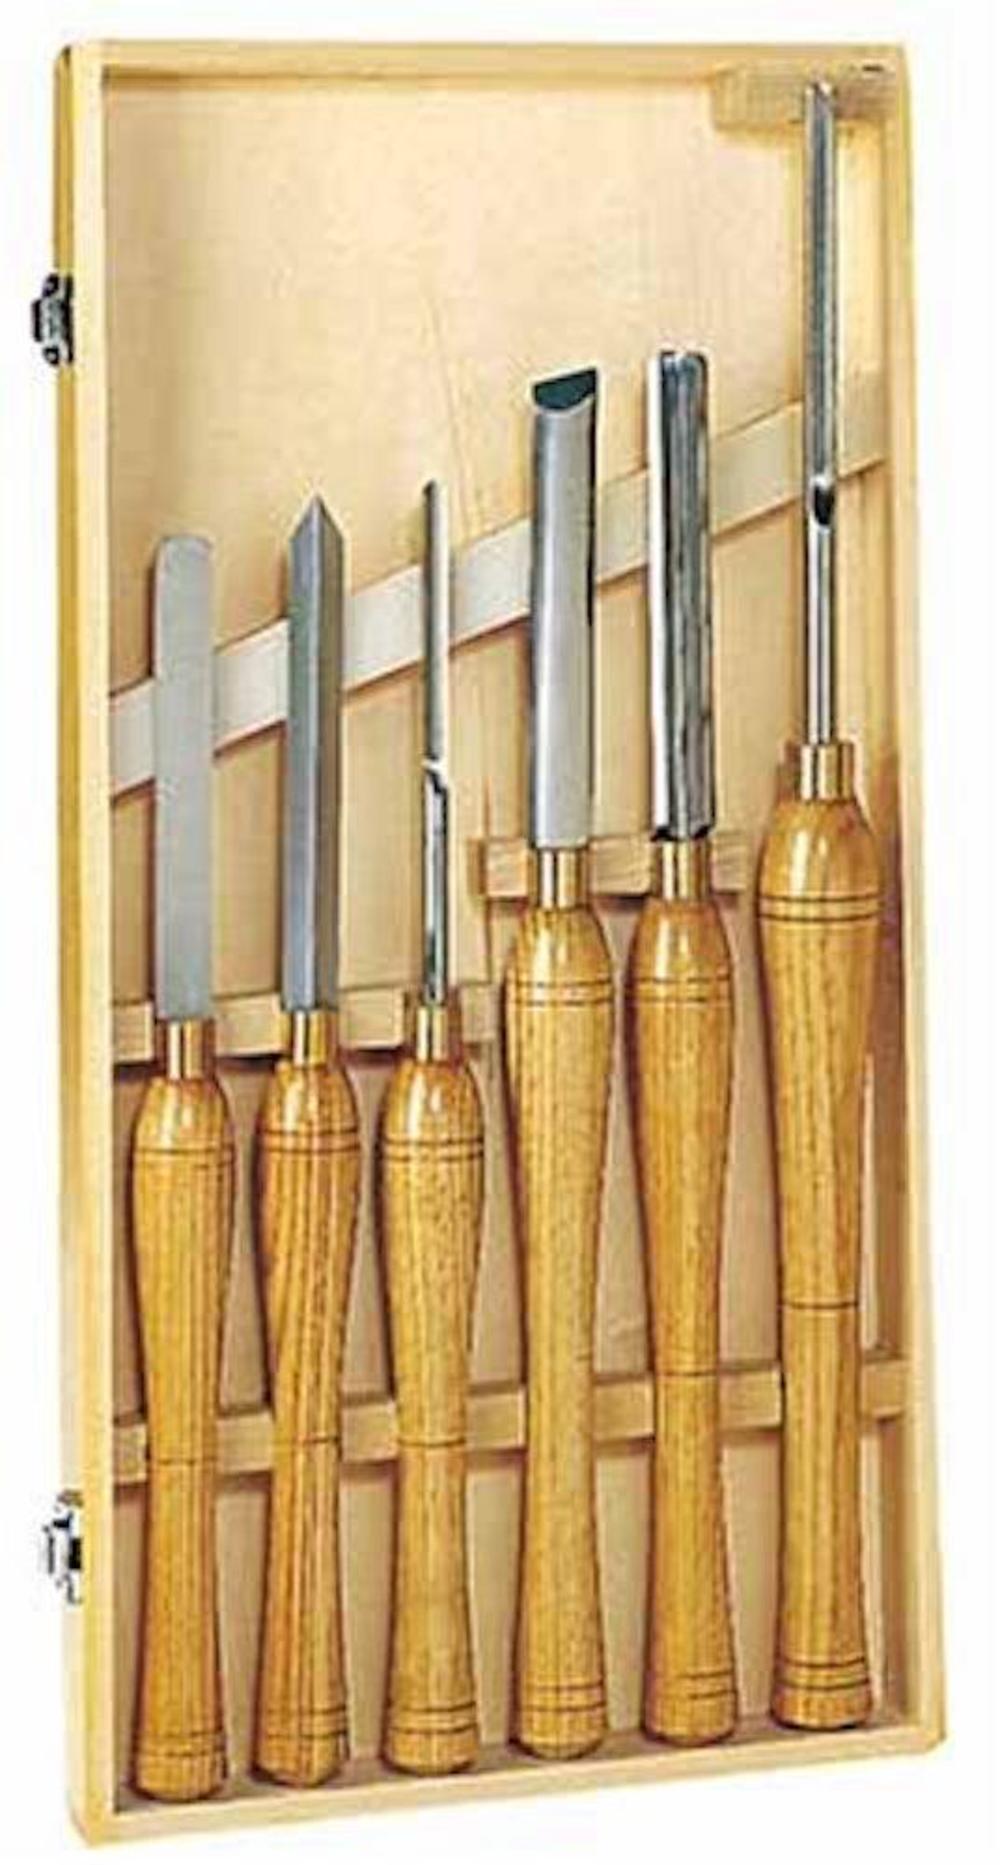 Wooden Woodworking Chisels, Luban Woodworking Tools